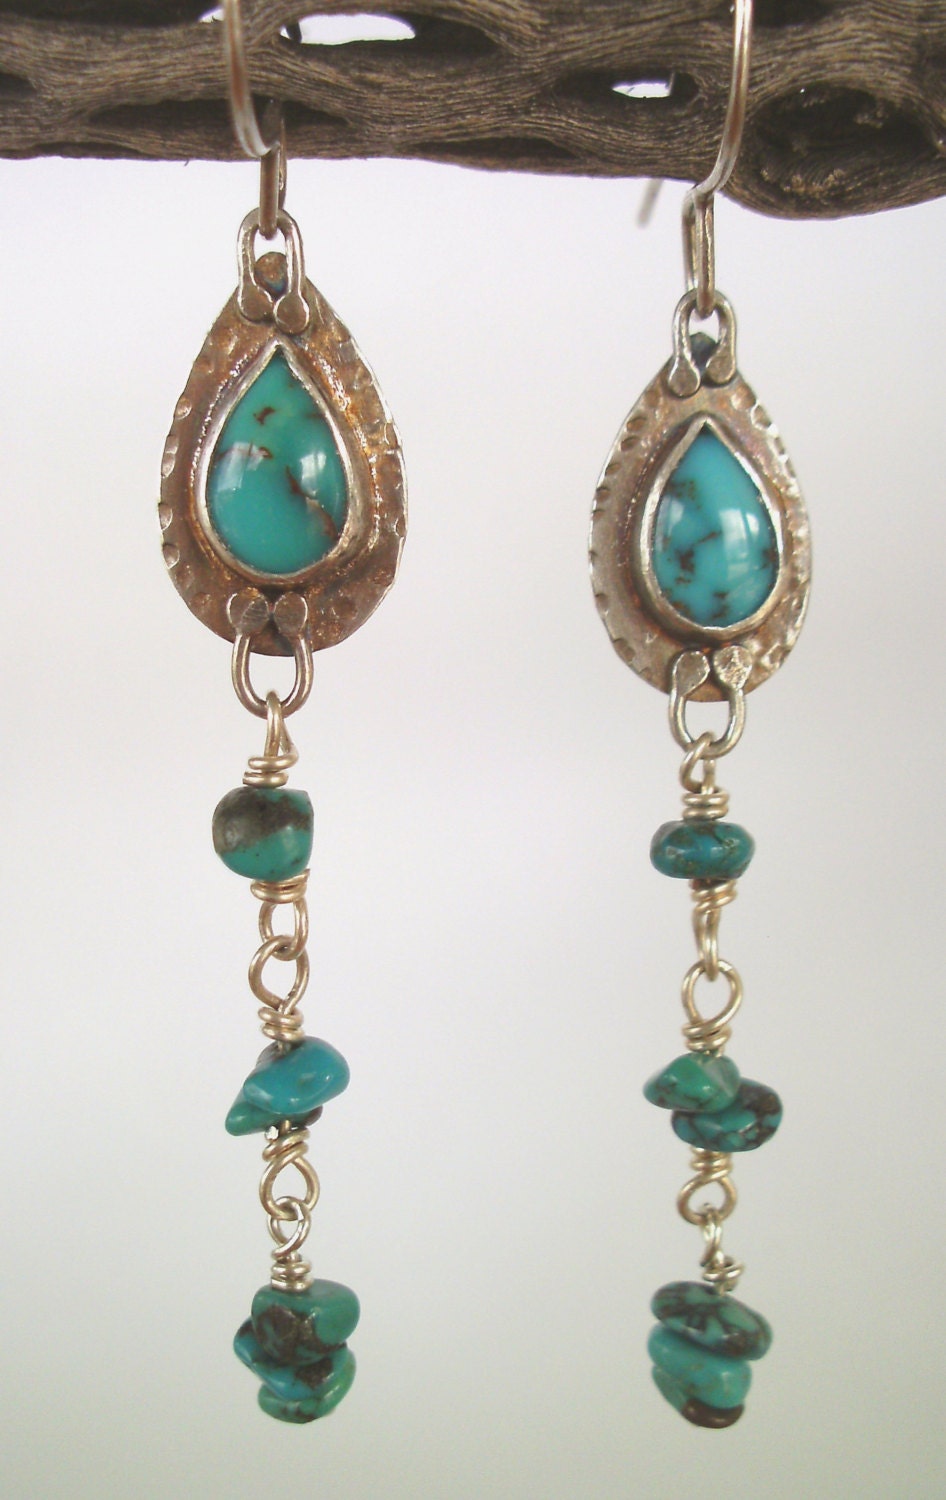 Earrings - Turquoise - Sterling Silver - Cabochon - Dangle - Silversmith - RMD Designs